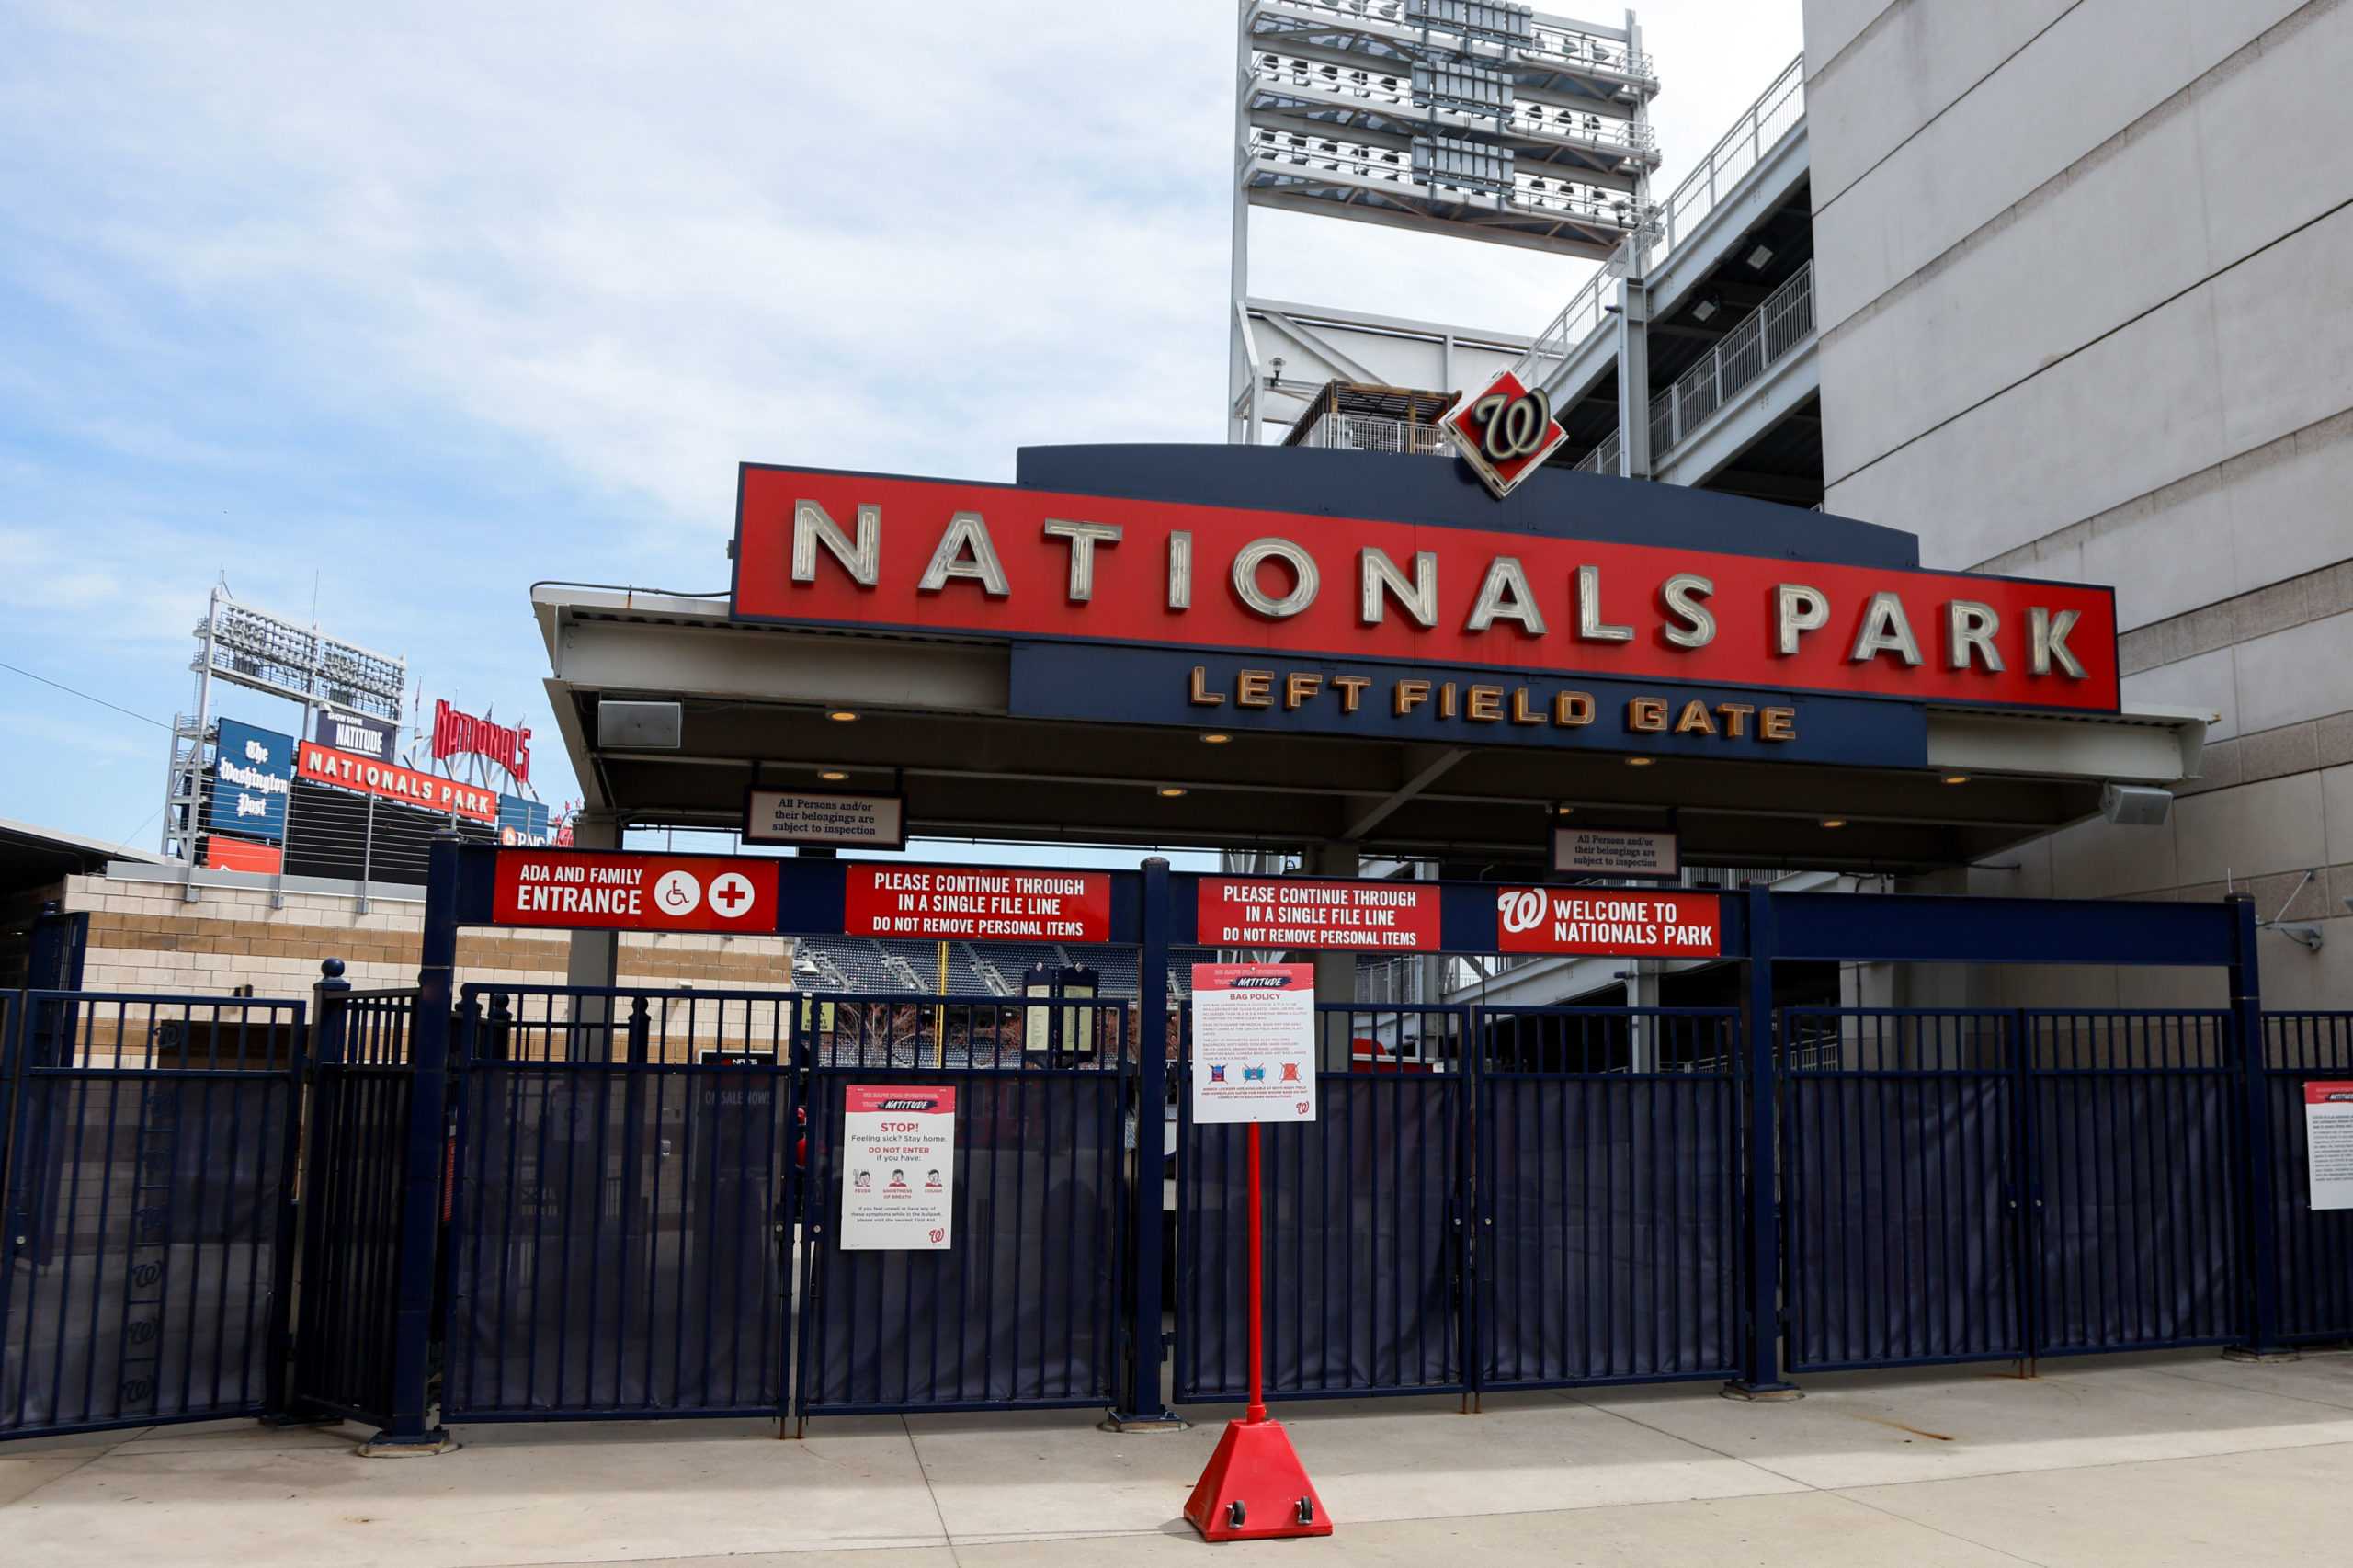 Washington Nationals set new sales record on City Connect Cherry Blossom  jersey